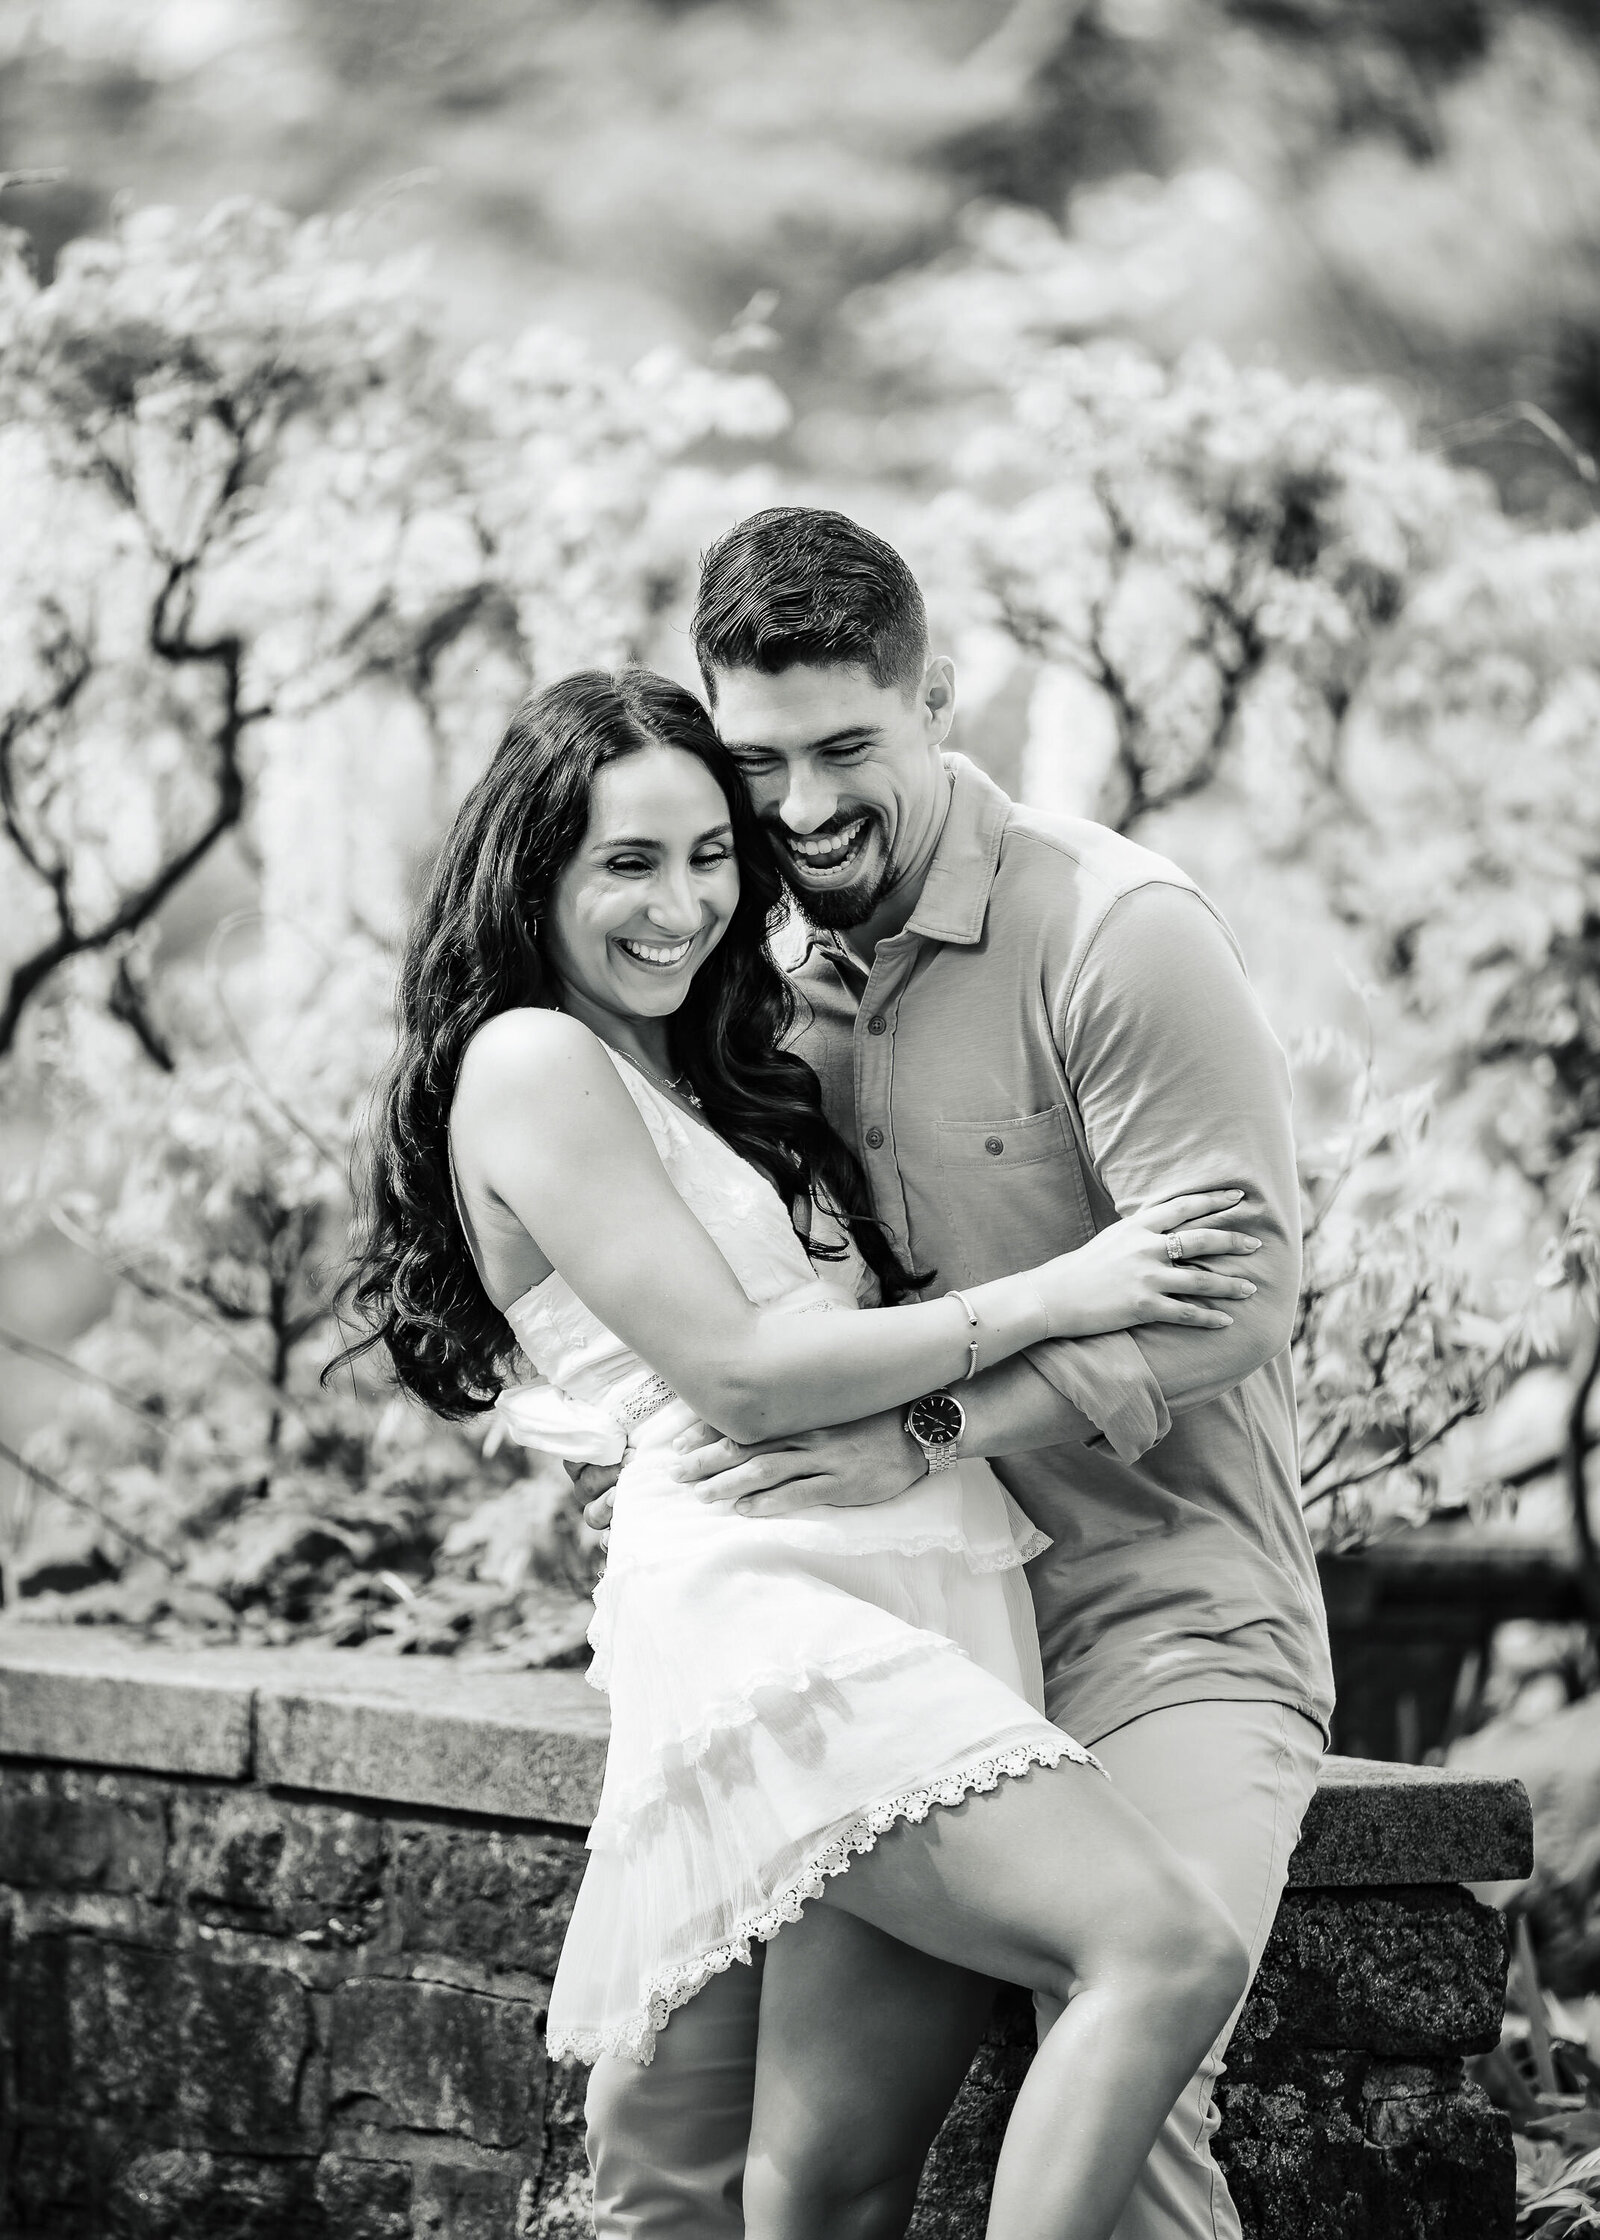 Looking for the BEST engagement photographer in New Jersey? Contact Ishan Fotografi for a free consultation.